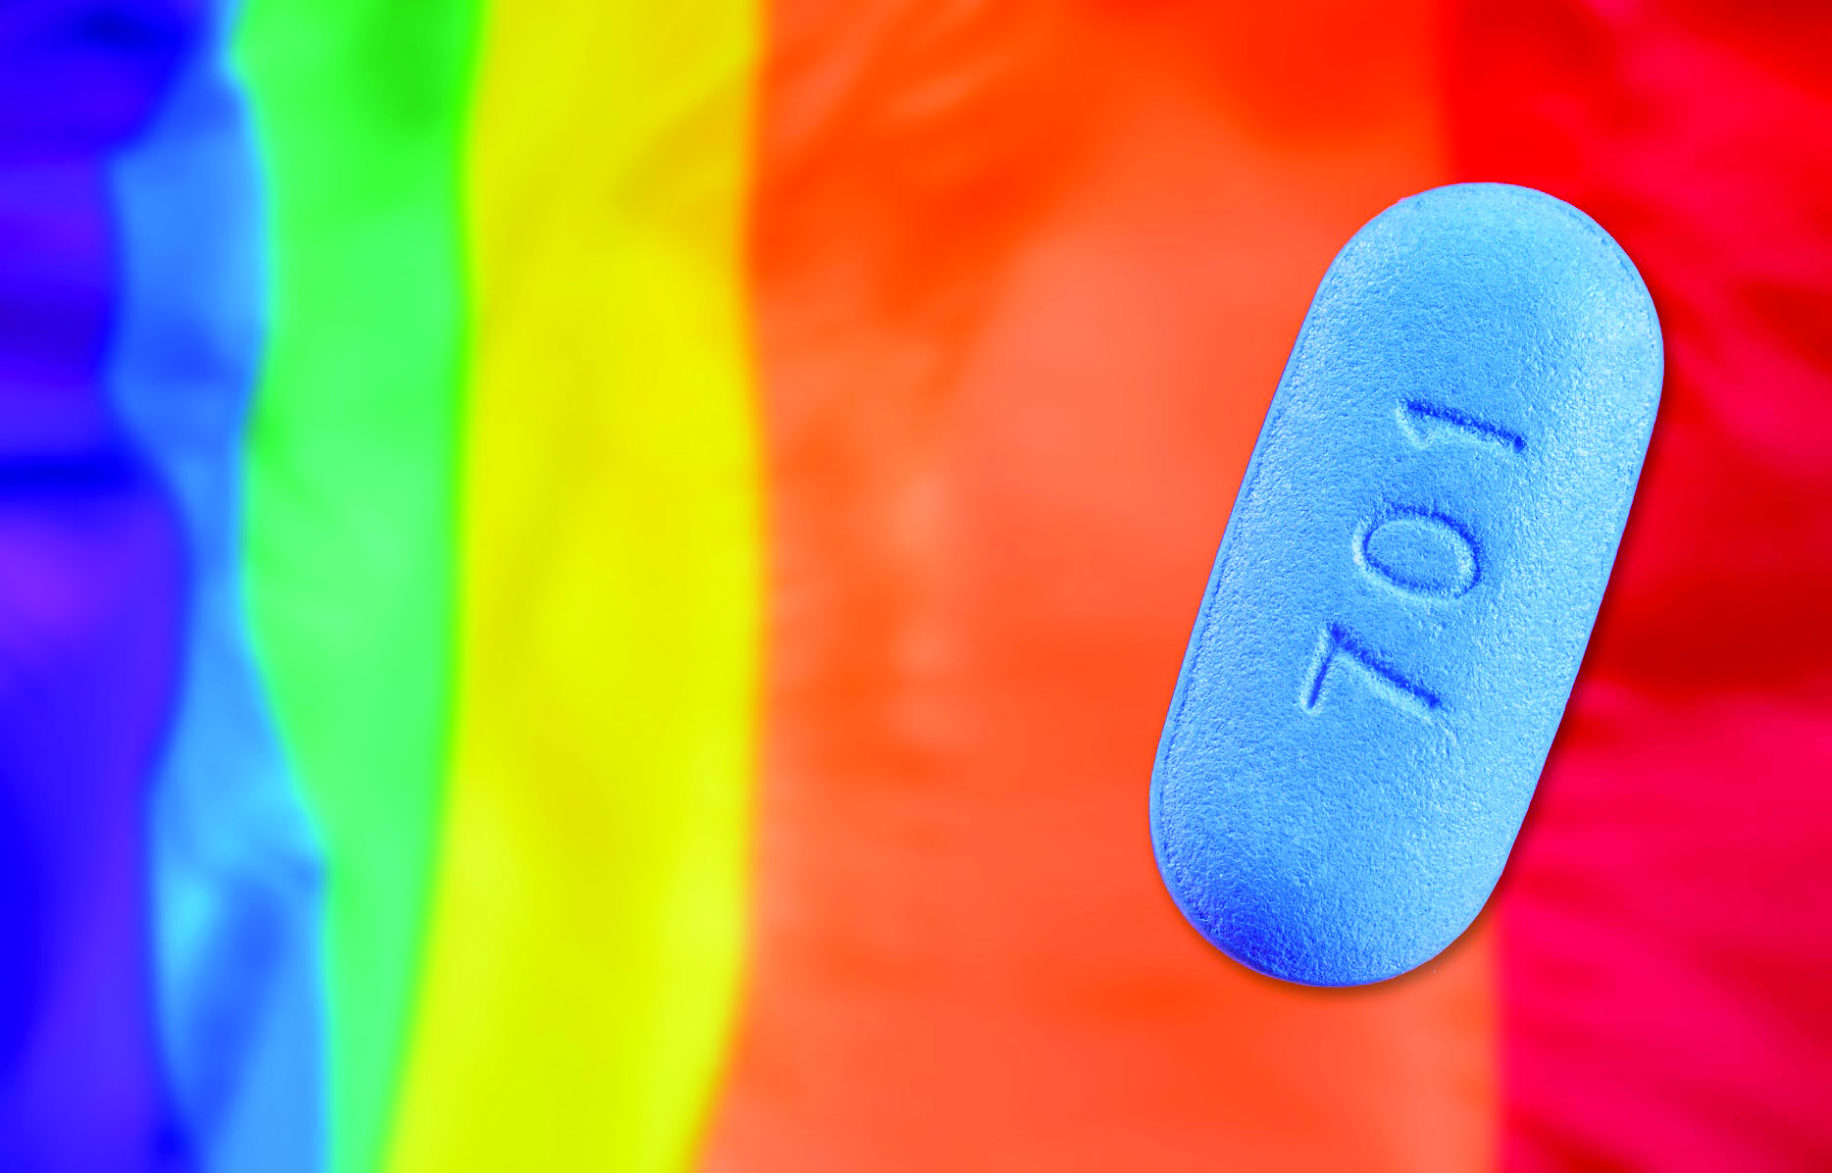 Pill used for Pre-Exposure Prophylaxis (PrEP) to prevent HIV